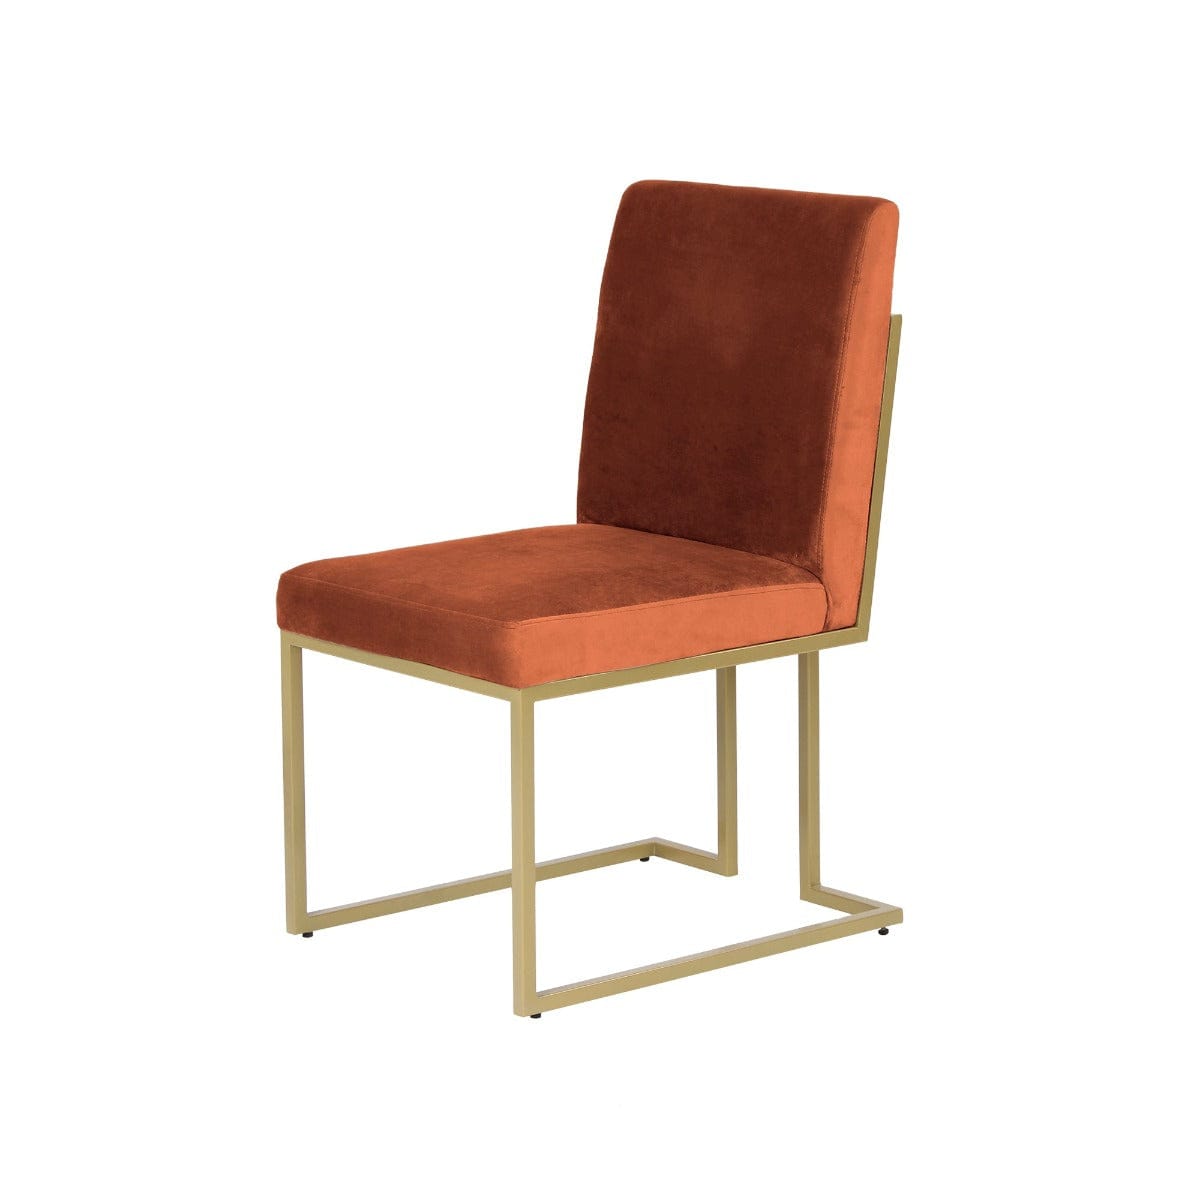 Finley Rust Velvet Fabric Dining Metal Chair In Gold Finish